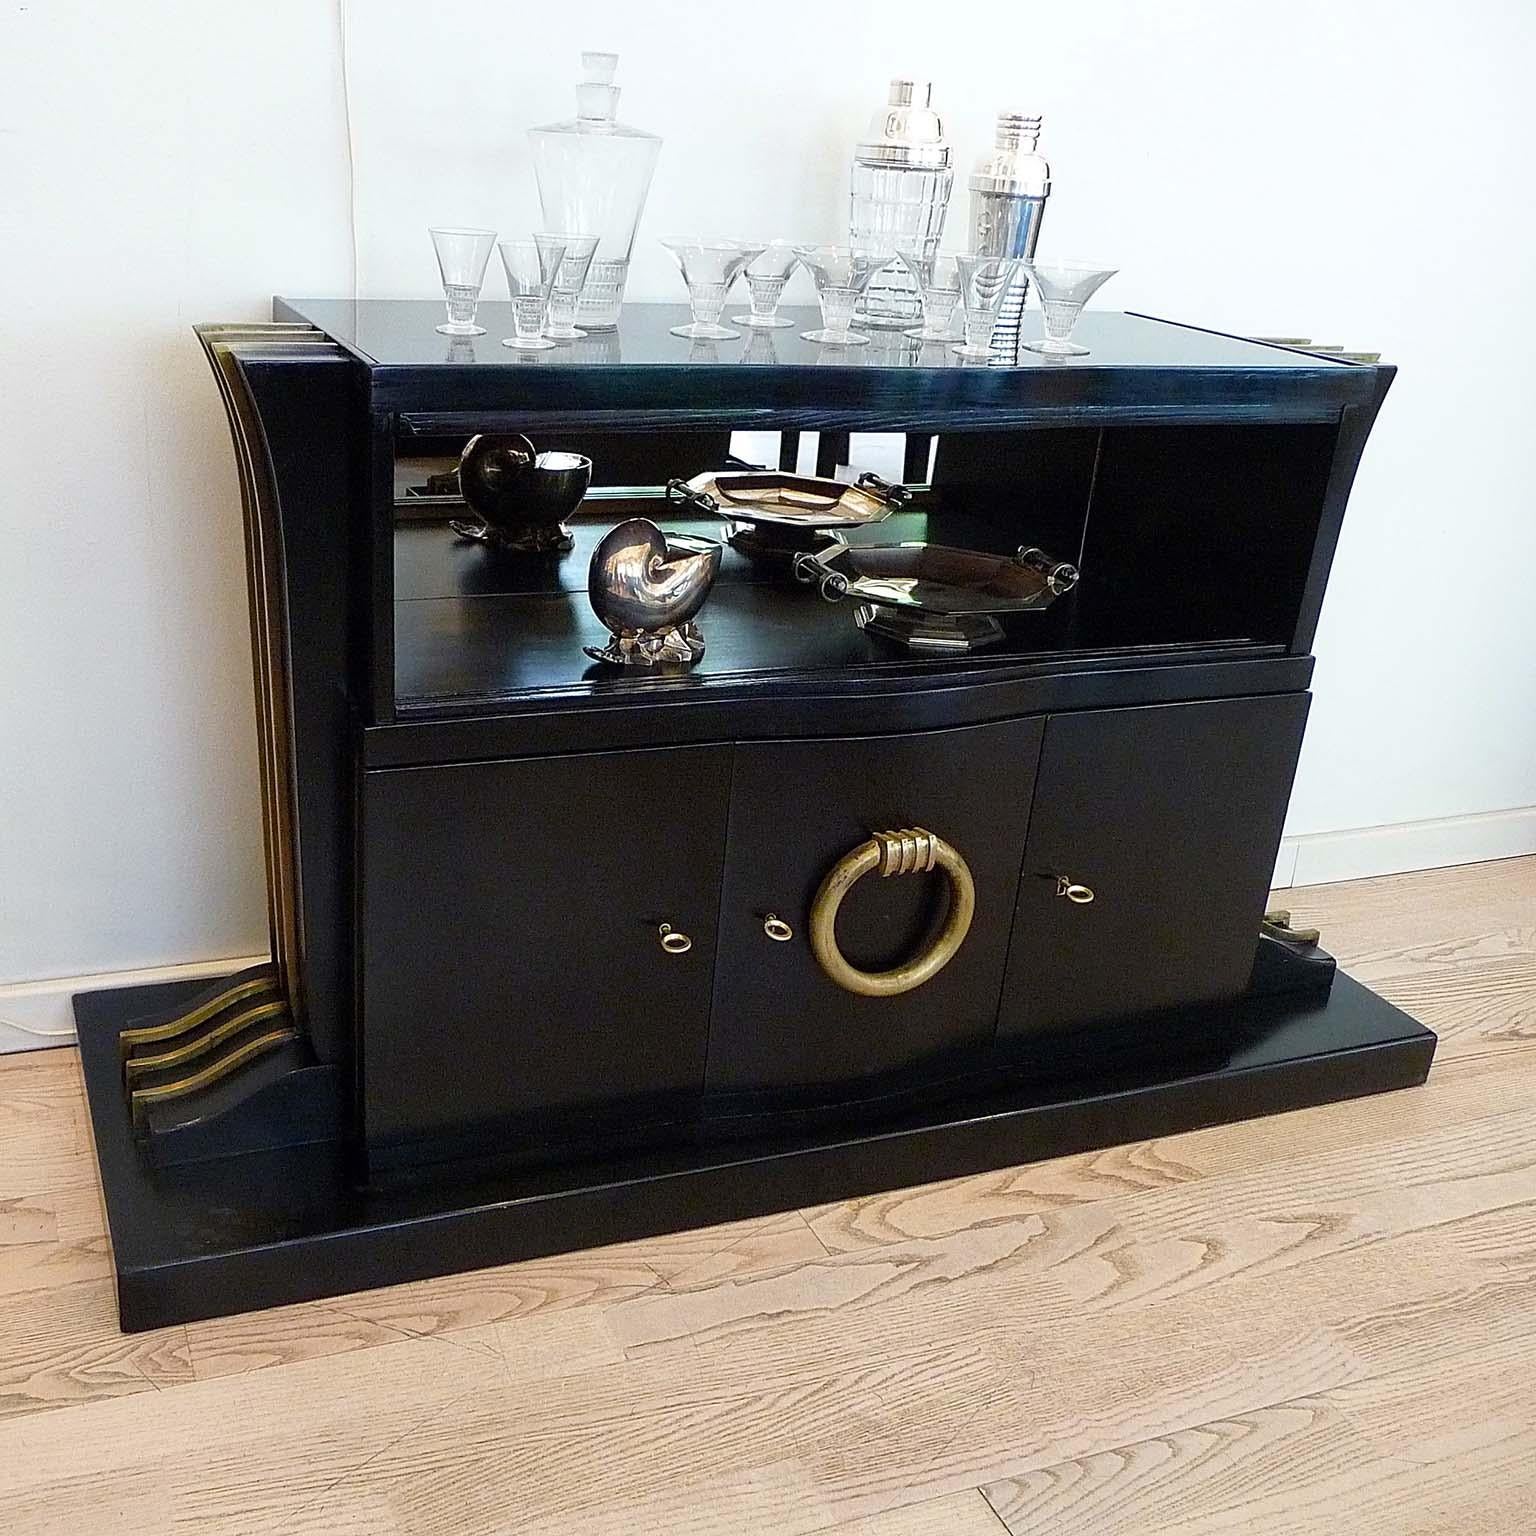 Brass Art Deco Dessert Commode Low Sideboard Designed by Jean Pascaud, France, 1930s For Sale